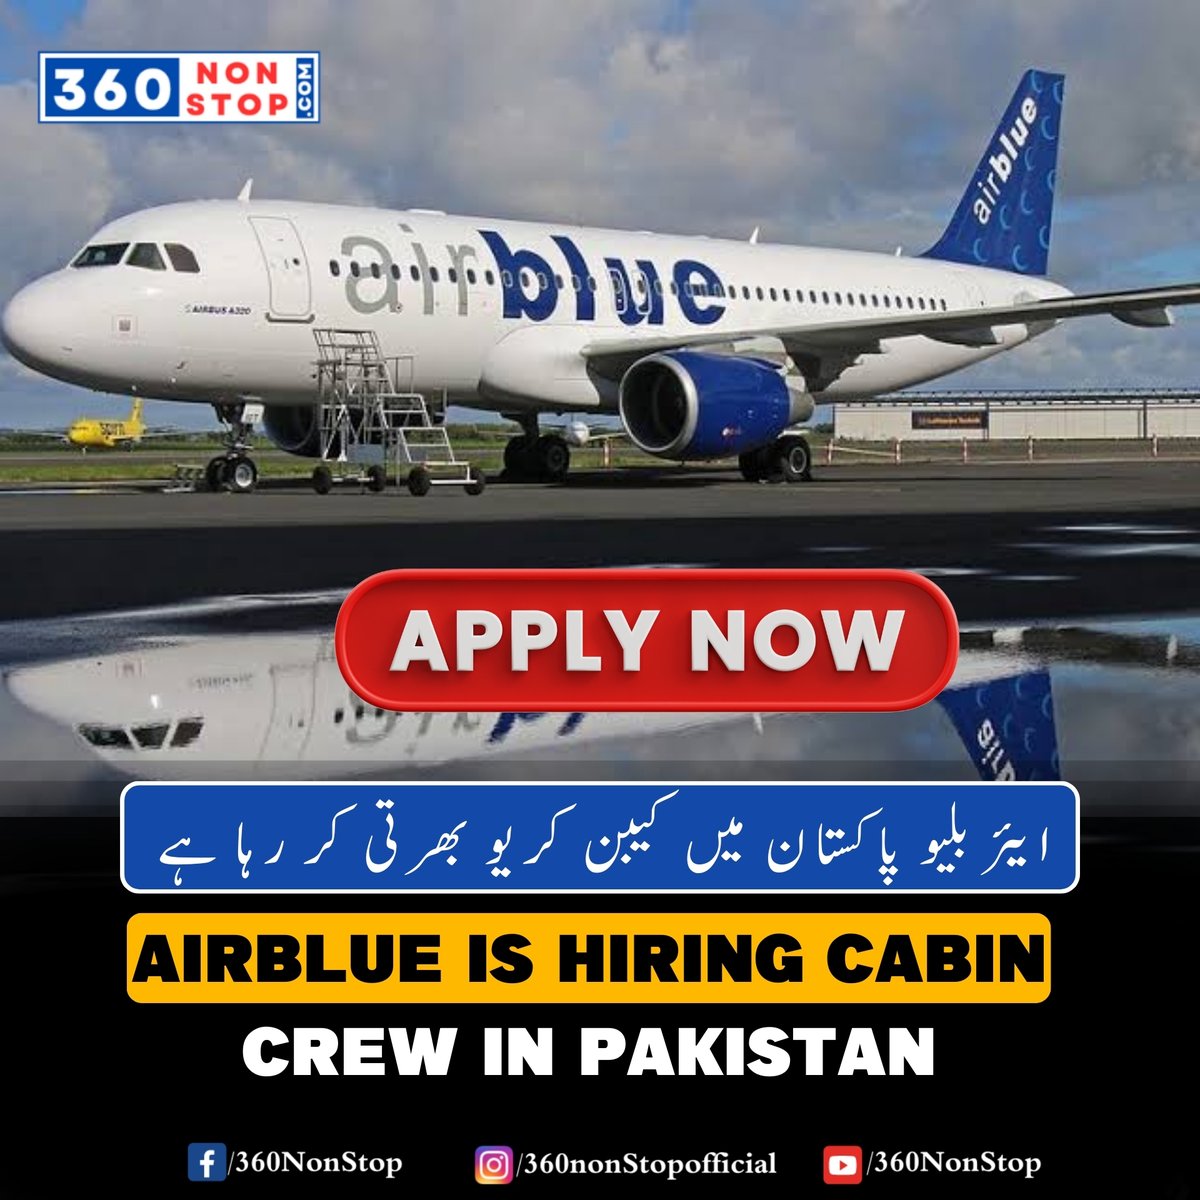 ✈️ Aviation News: ایئر بلیو پاکستان میں کیبن کریو بھرتی کر رہا ہے. Airblue is currently hiring cabin crew positions in Pakistan. 📱 Follow us on Instagram: shorturl.at/zKORU 🌐 Join Our Facebook Group: shorturl.at/mqy14 #Airblue #CabinCrew #AviationJobs #360NonStop